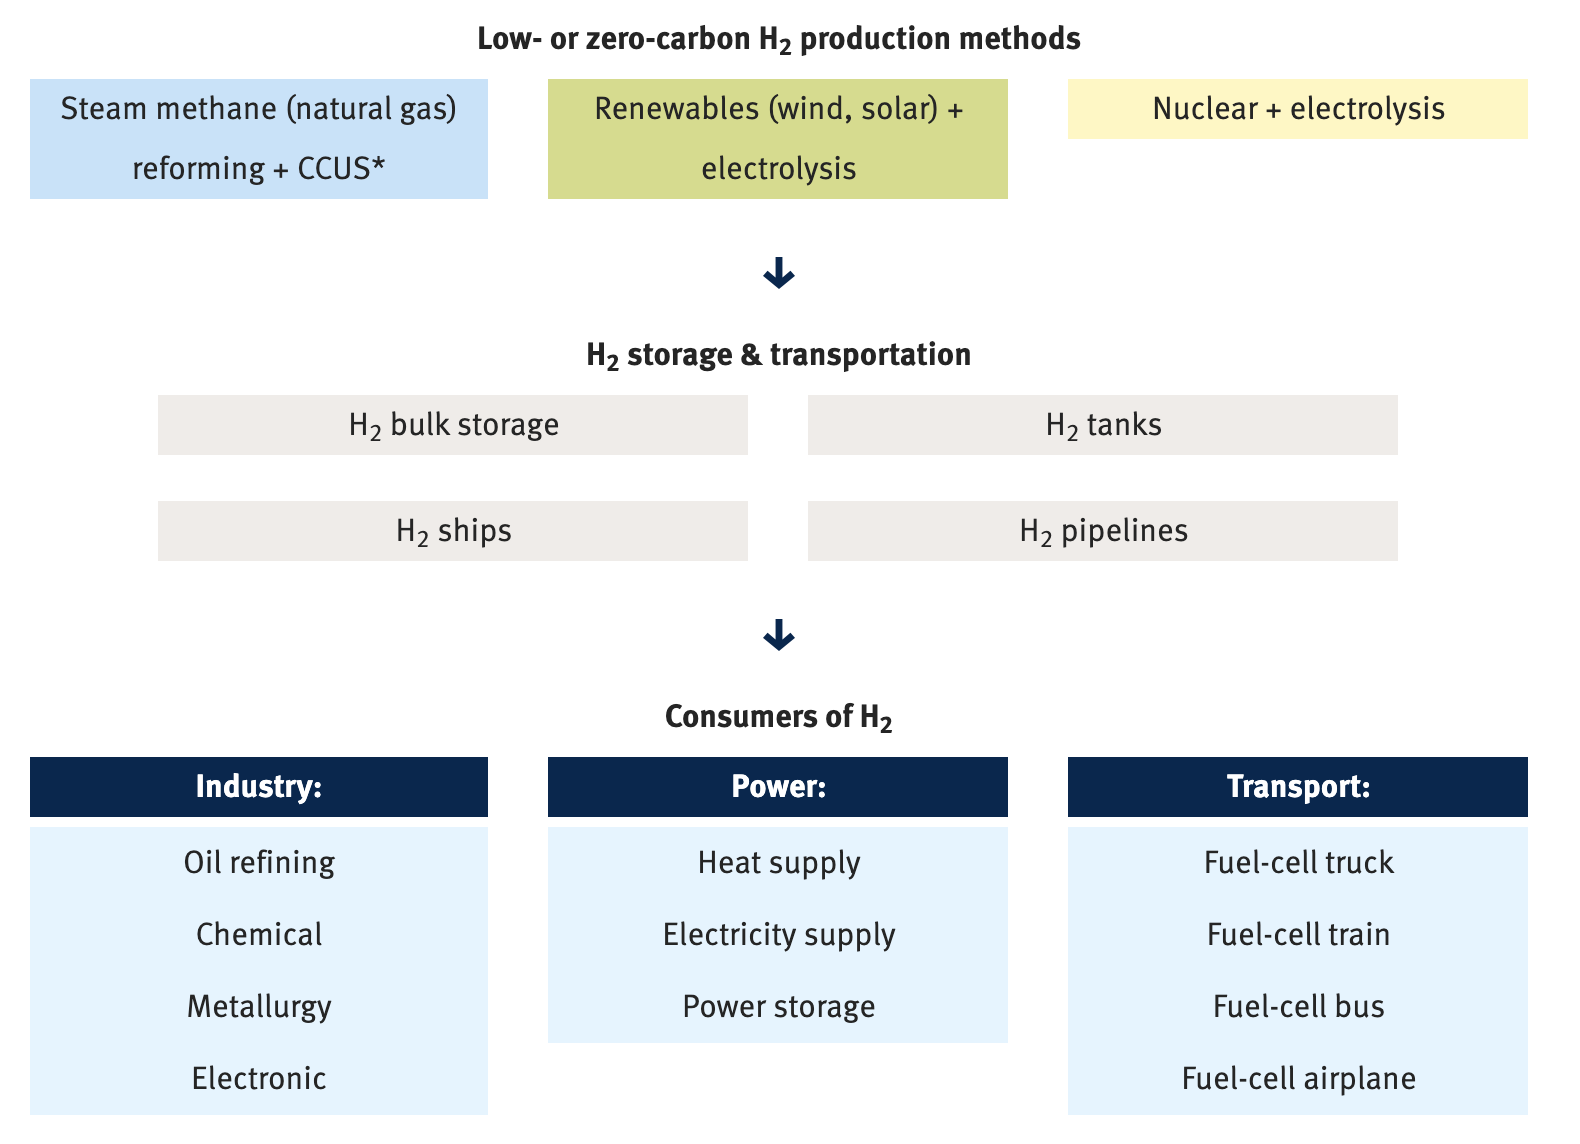 The flow diagram represents stages in the hydrogen supply chain from production to consumers. The first stage, “Low- or zero-carbon production methods” includes three items: Steam methane (natural gas) reforming + carbon capture, utilization, and storage (CCUS); Renewables (wind, solar) + electrolysis; Nuclear + electrolysis. The second stage, “Storage and transportation”, includes four items: bulk storage; tanks; ships; and pipelines. The third stage, “Consumers”, includes three items: Industry (oil refining, chemical, metallurgy, electronic); Power (heat supply, electricity supply, power storage); and Transport (fuel-cell-powered trucks, trains, buses, and airplanes). Low- or zero-carbon H2 production methods Steam methane (natural gas) reforming + CCUS* Renewables (wind, solar) + electrolysis Nuclear + electrolysis H2 storage & transportation H2 bulk storage H2 tanks H2 ships H2 pipelines Consumers of H2 Industry: Oil refining Chemical Metallurgy Electronic Power: Heat supply Electricity supply Power storage Transport: Fuel-cell truck Fuel-cell train Fuel-cell bus Fuel-cell airplane